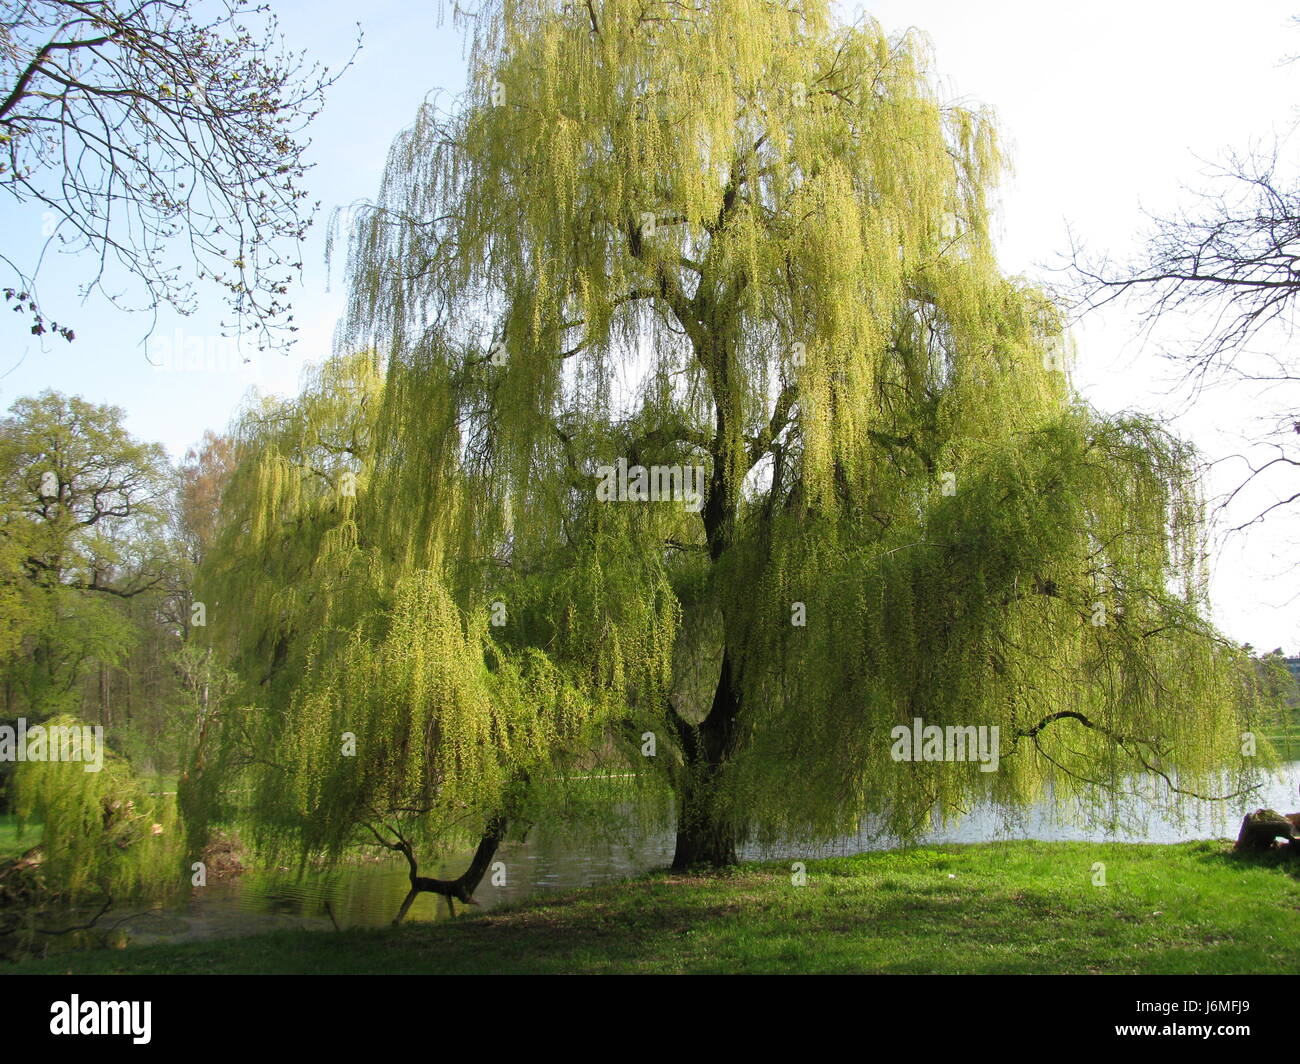 5 Purple Willow Seeds Tree Weeping Flower Giant Full Landscape